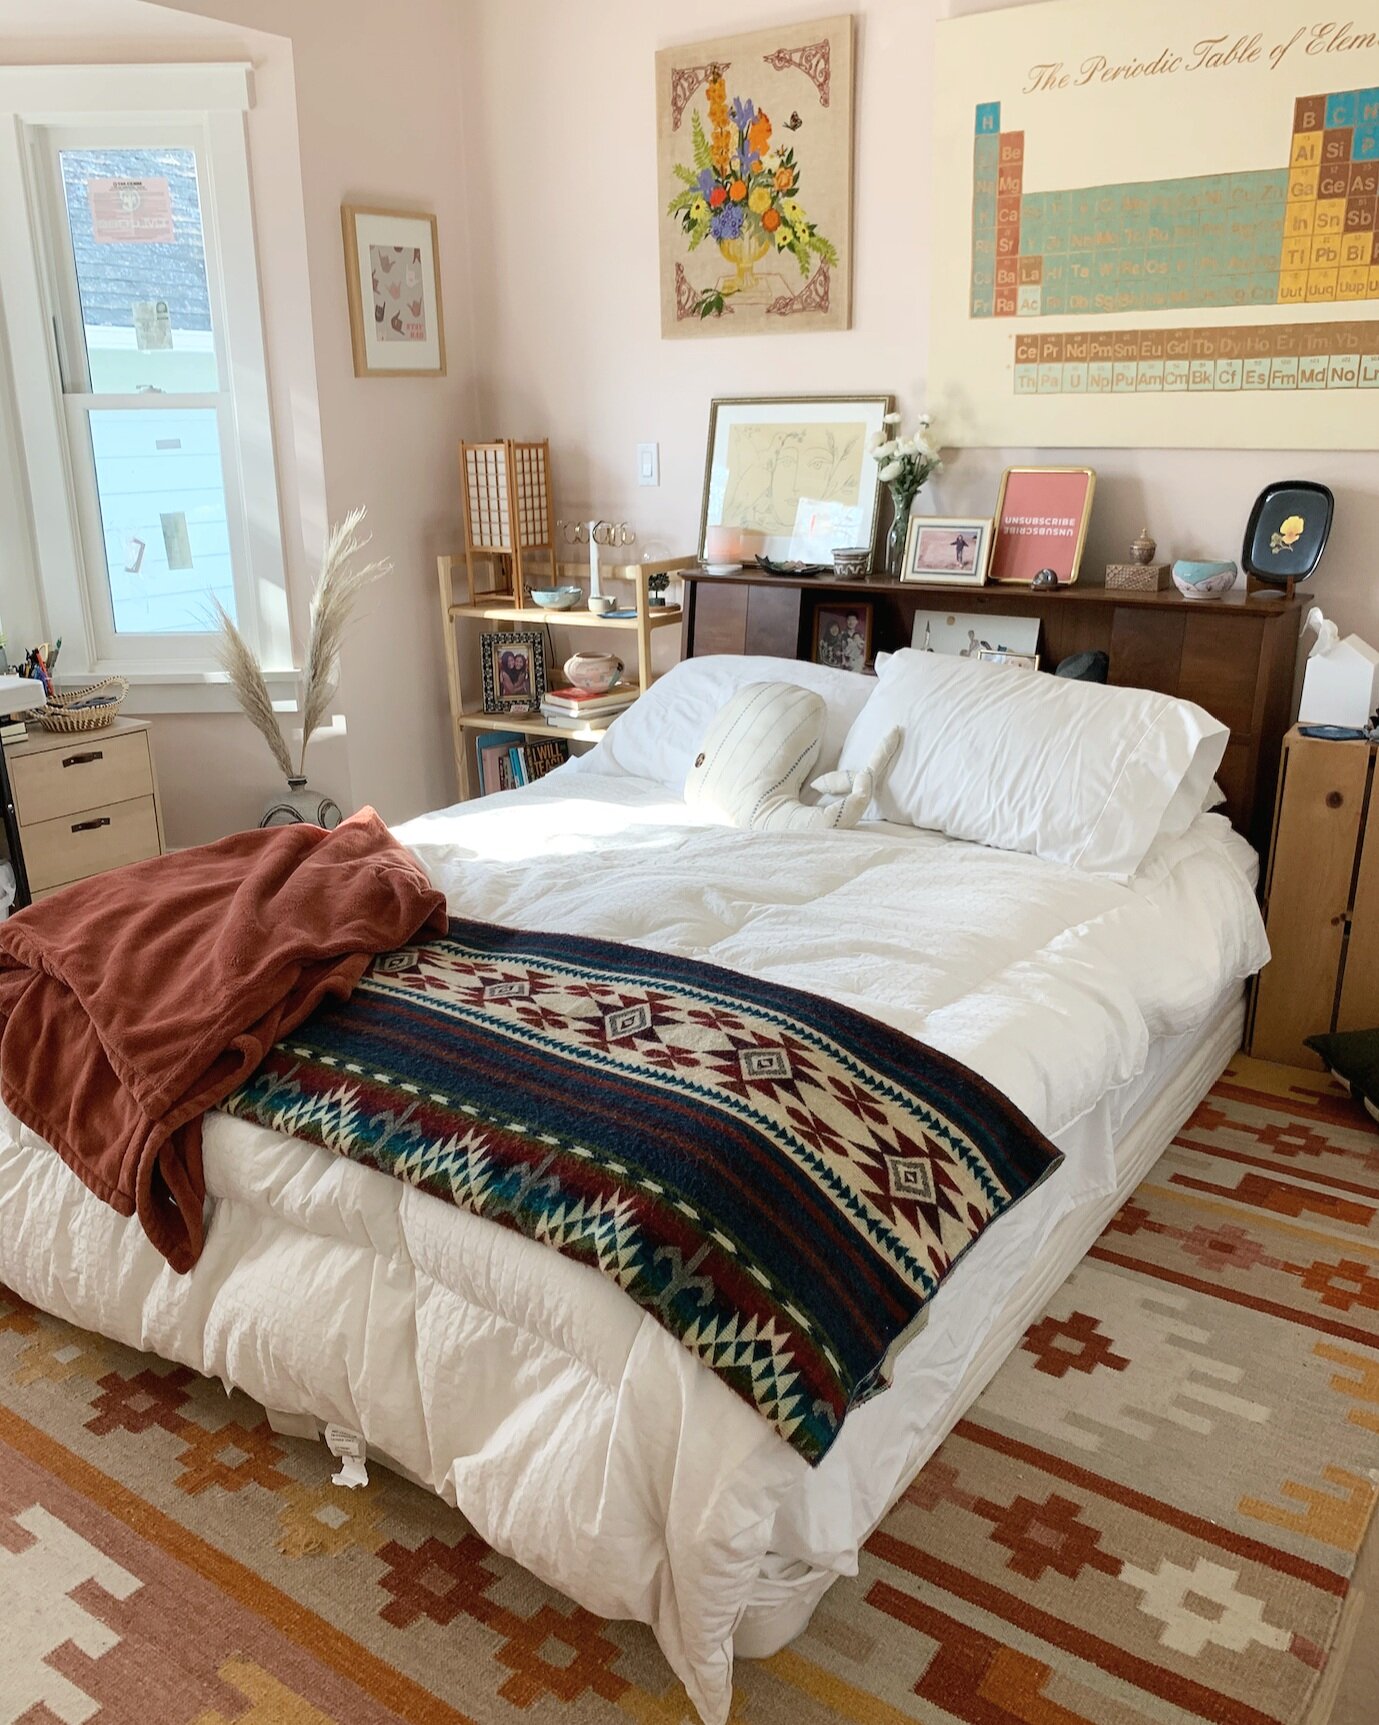 5 Easy Ideas to Decorate Your Space on a Budget + My Bedroom Tour ...